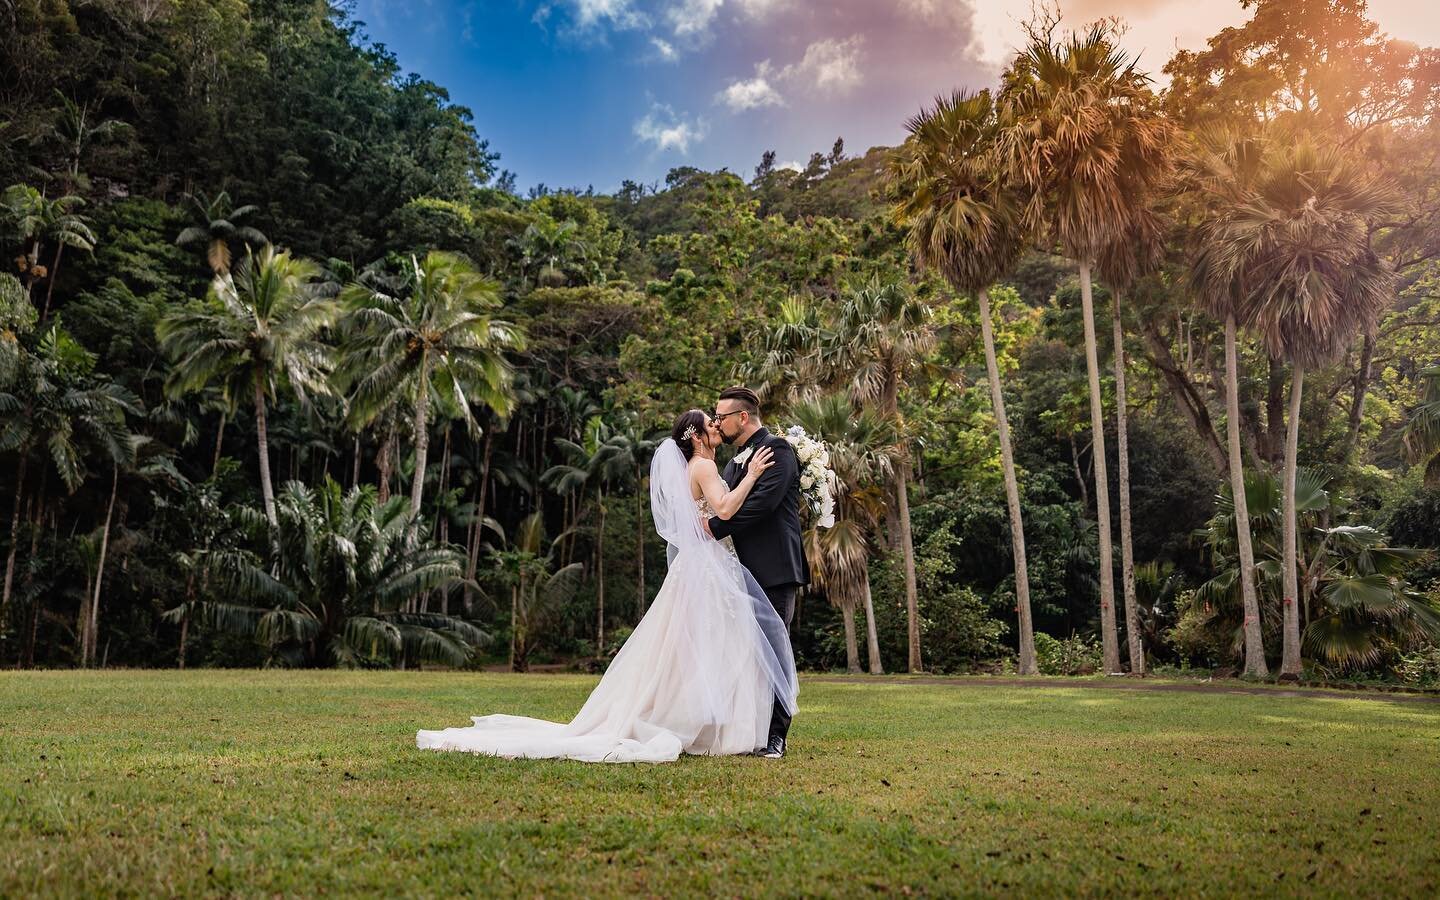 Tyler &amp; Mikayla&rsquo;s destination wedding in Hawaii was truly a beautiful day. Congratulations to these amazing lovebirds.